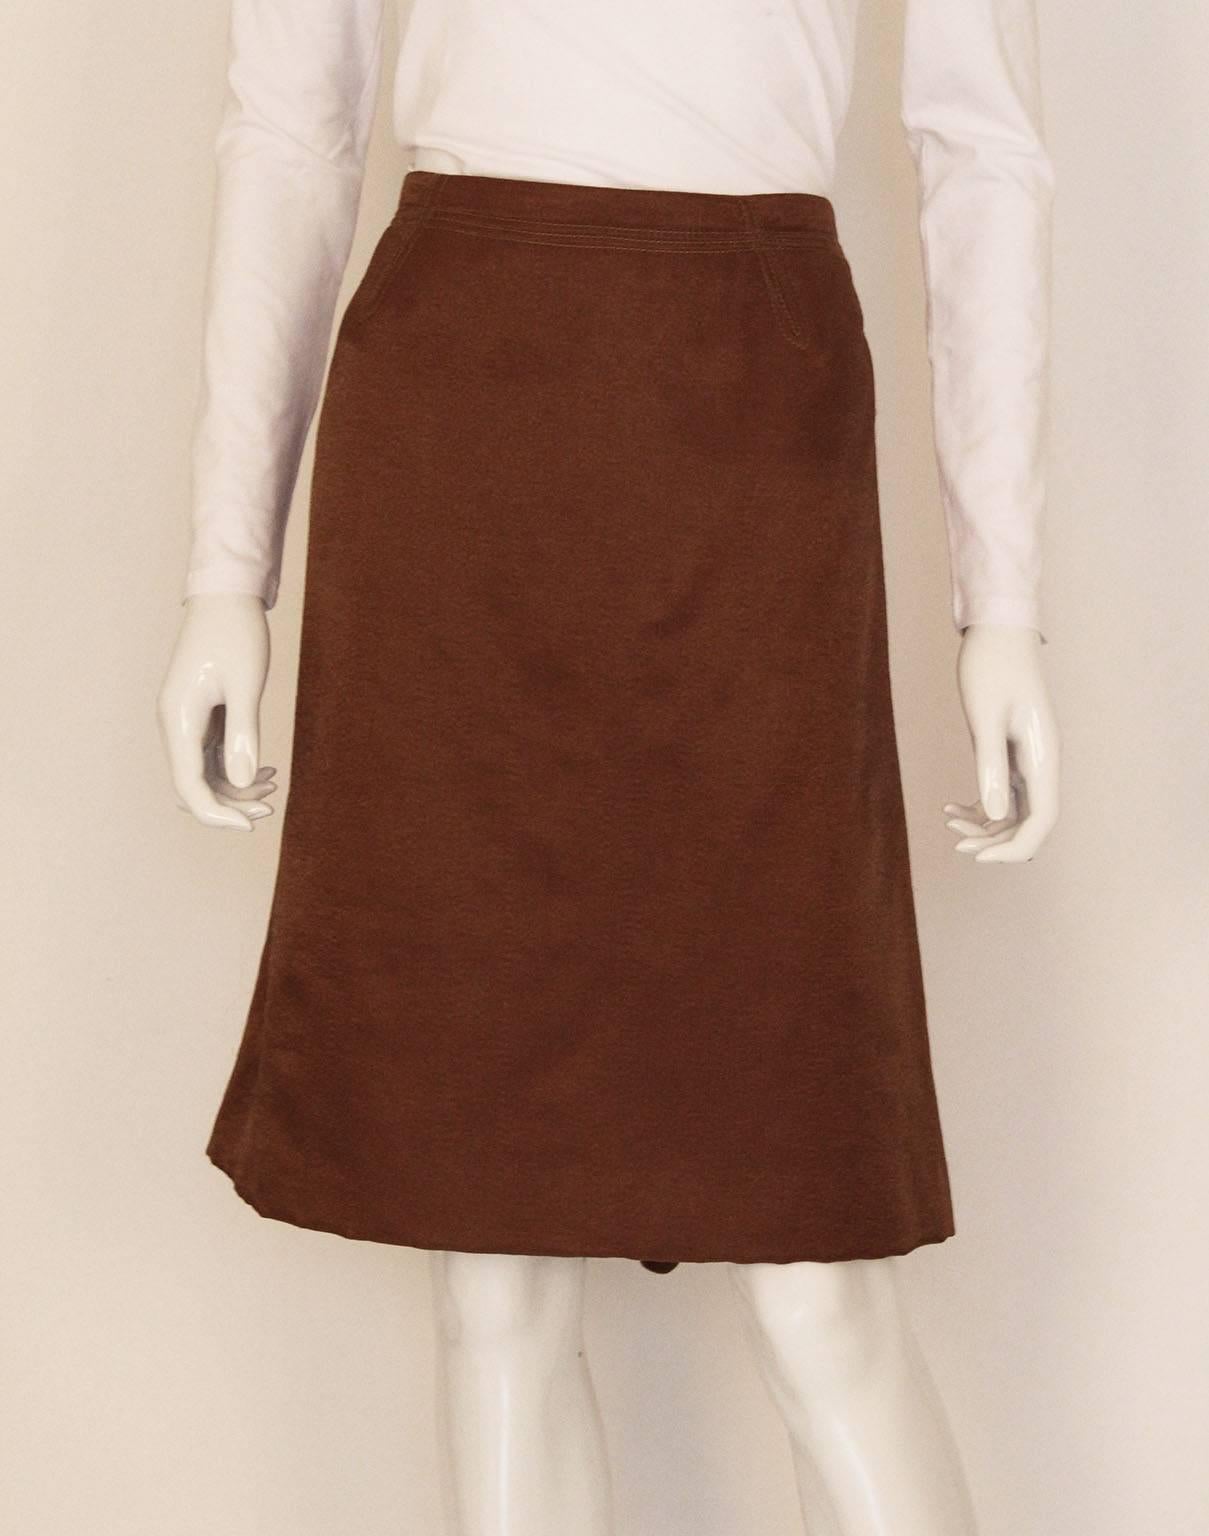 A wonderful bronze coloured skirt by Nina Ricci, Paris. The skirt is made of a luxurious wool mix, and is fully lined. There is a double row of stitching on the waist band , and the back has an interesting zig zag detail and gathering.
It is marked